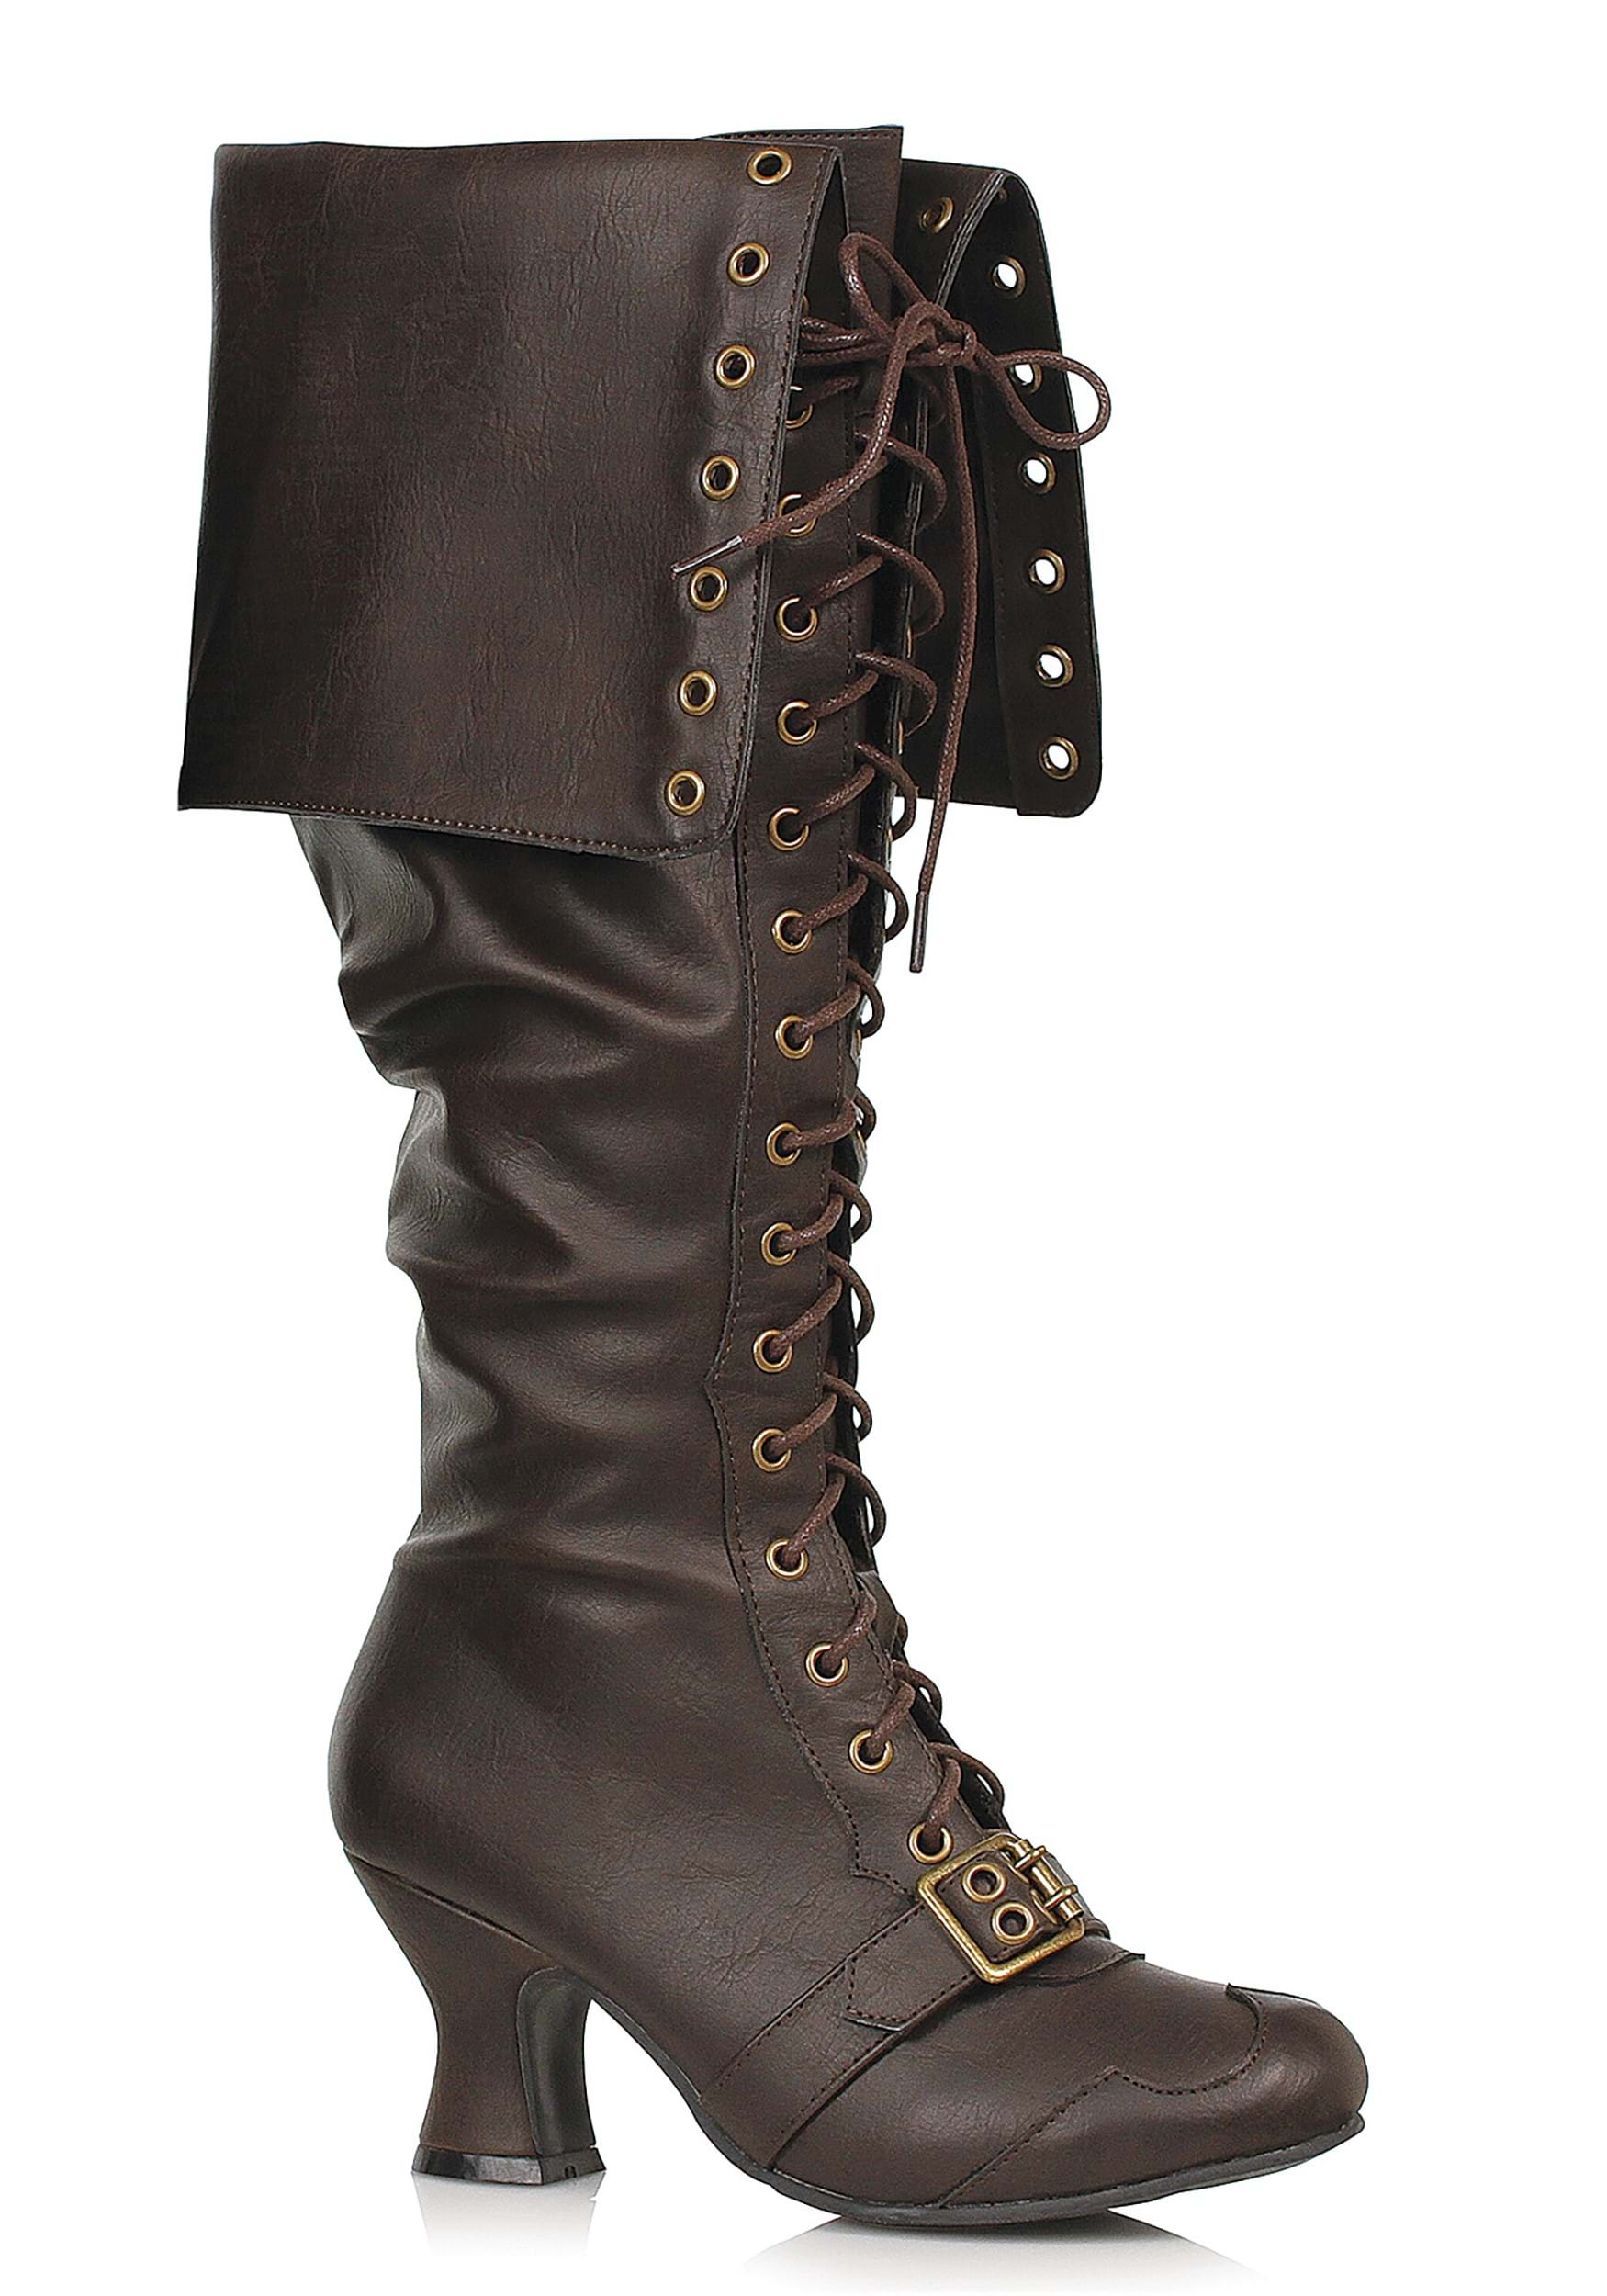 Image of Women's Laceup Pirate Boot ID EE254MAUDEBR-10